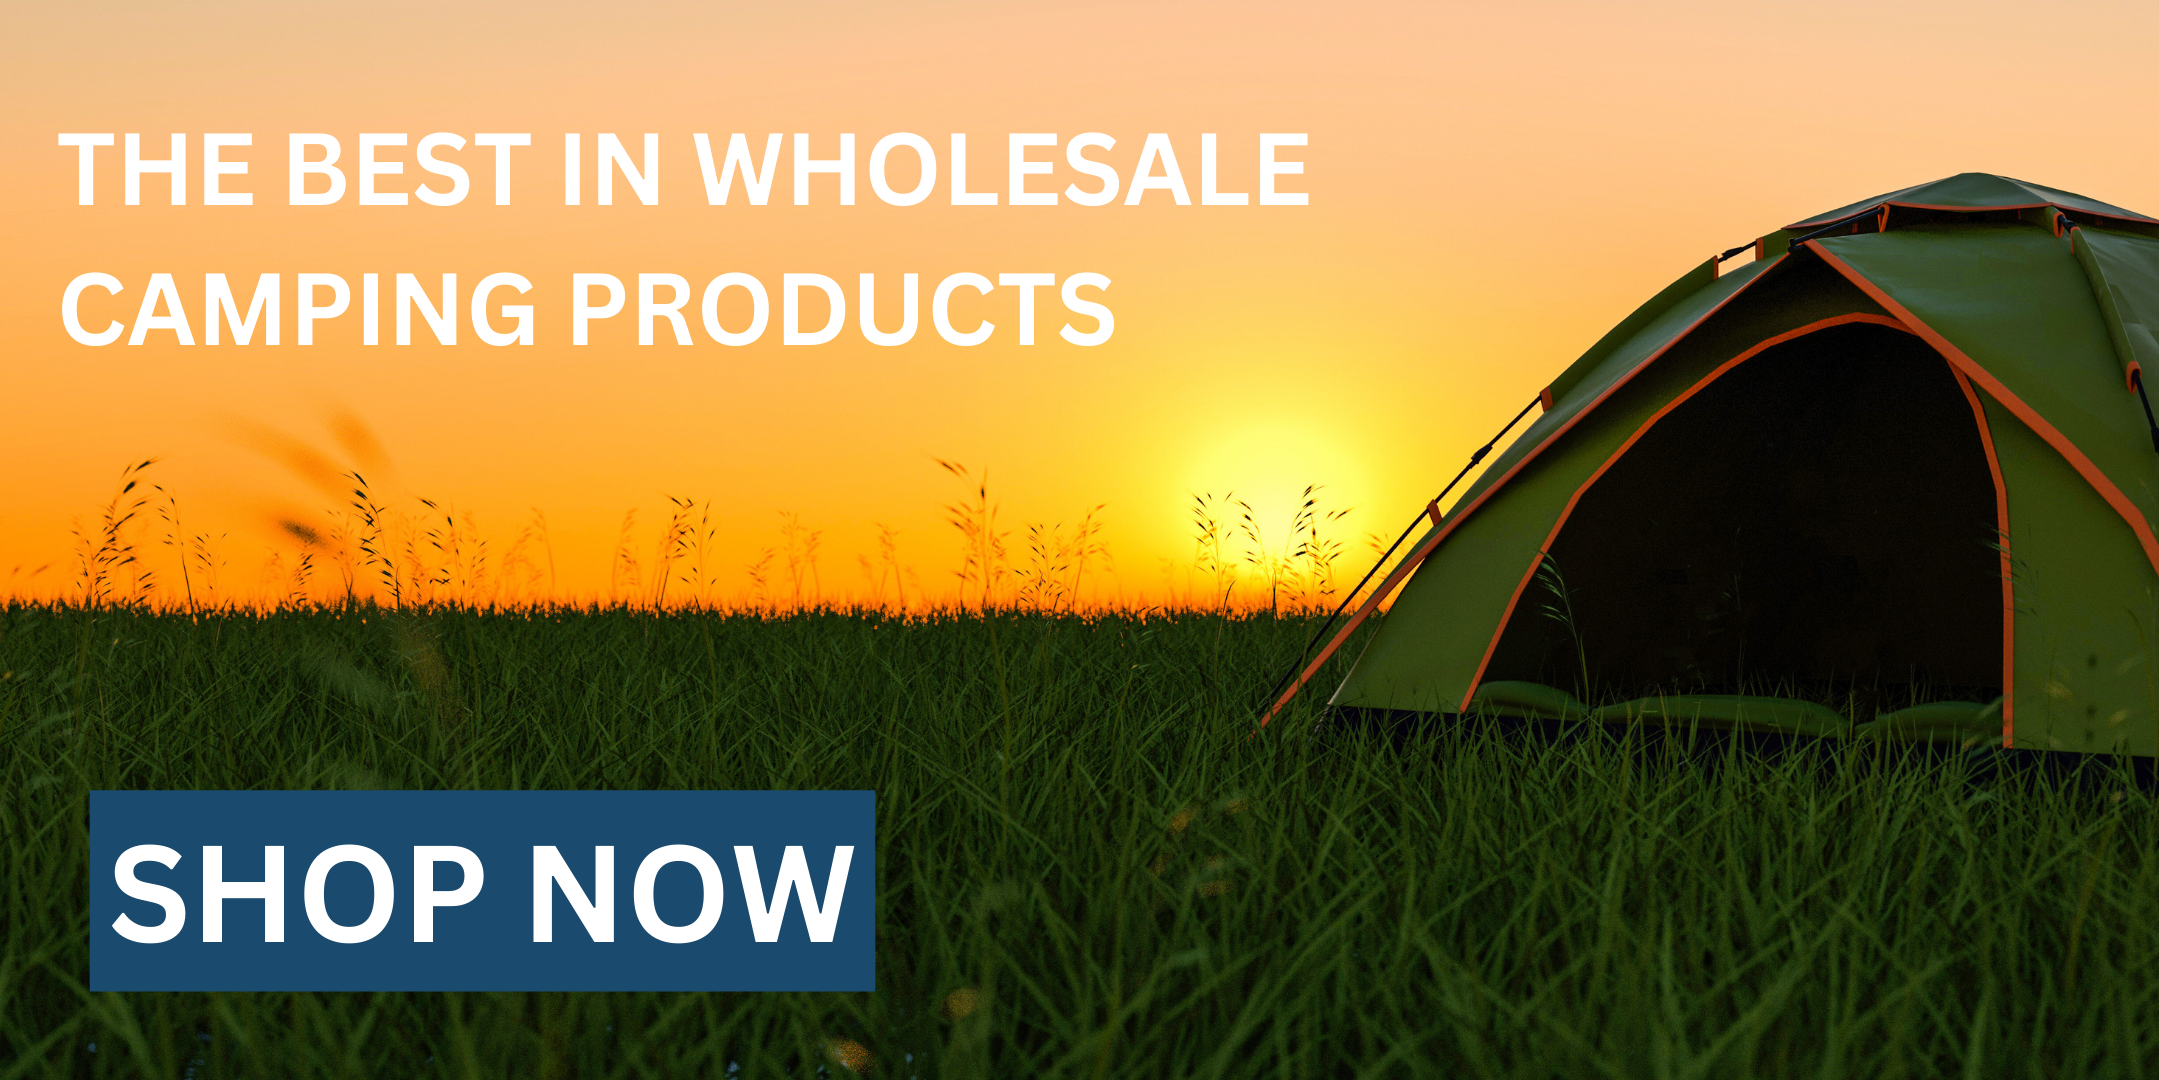 Wholesale Camping Products